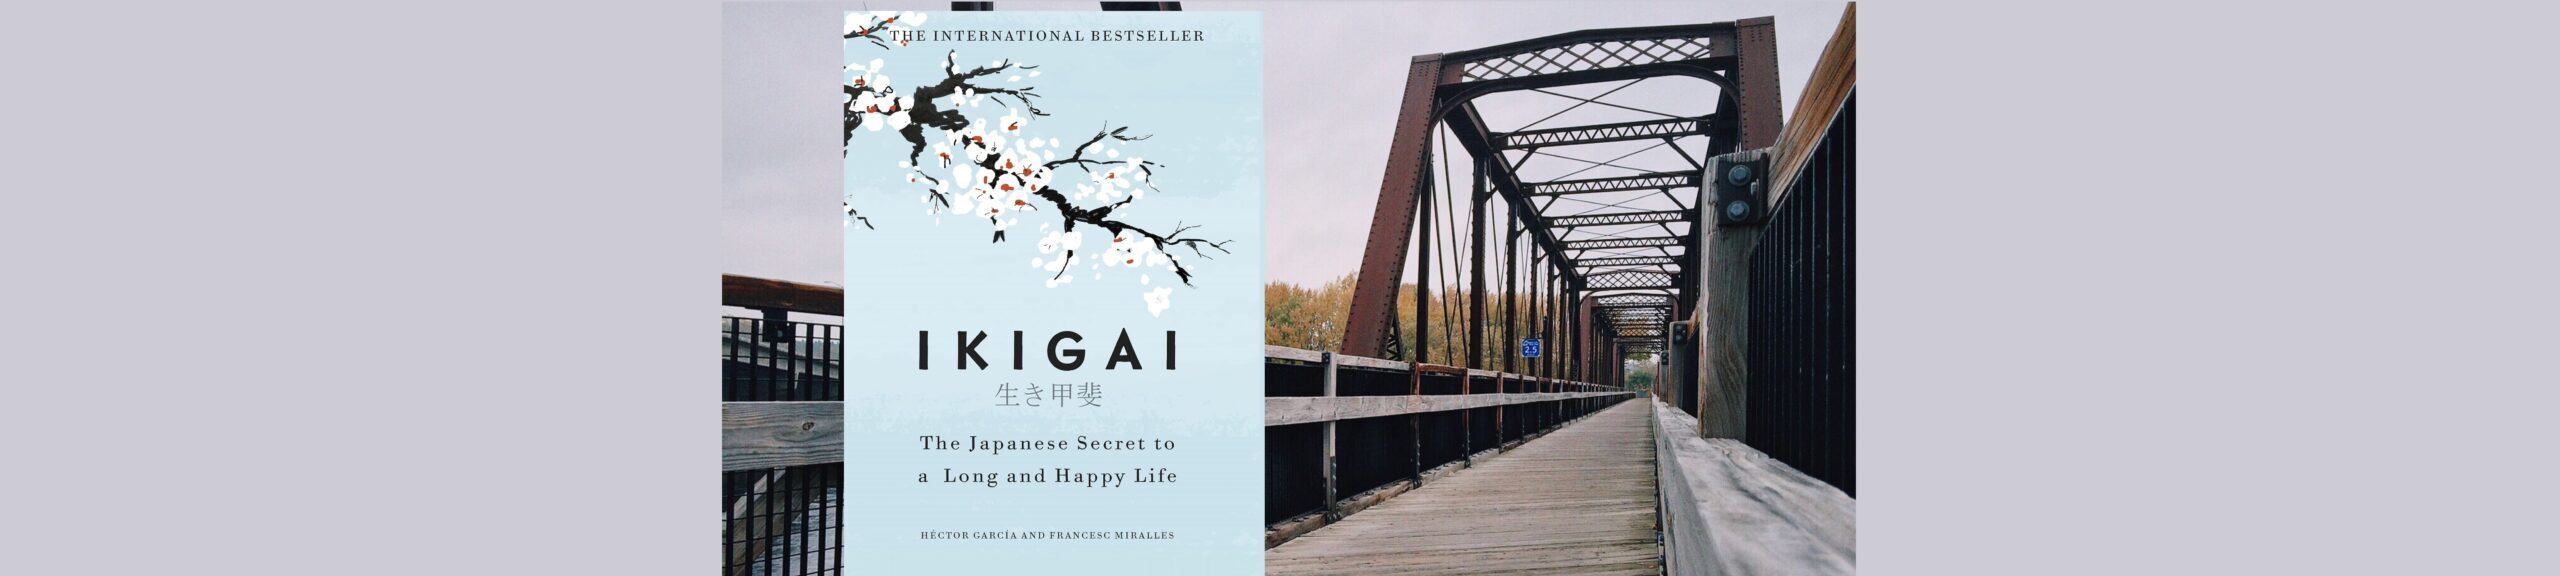 Ikigai: The Japanese Philosophy for a Healthy and Happy Life